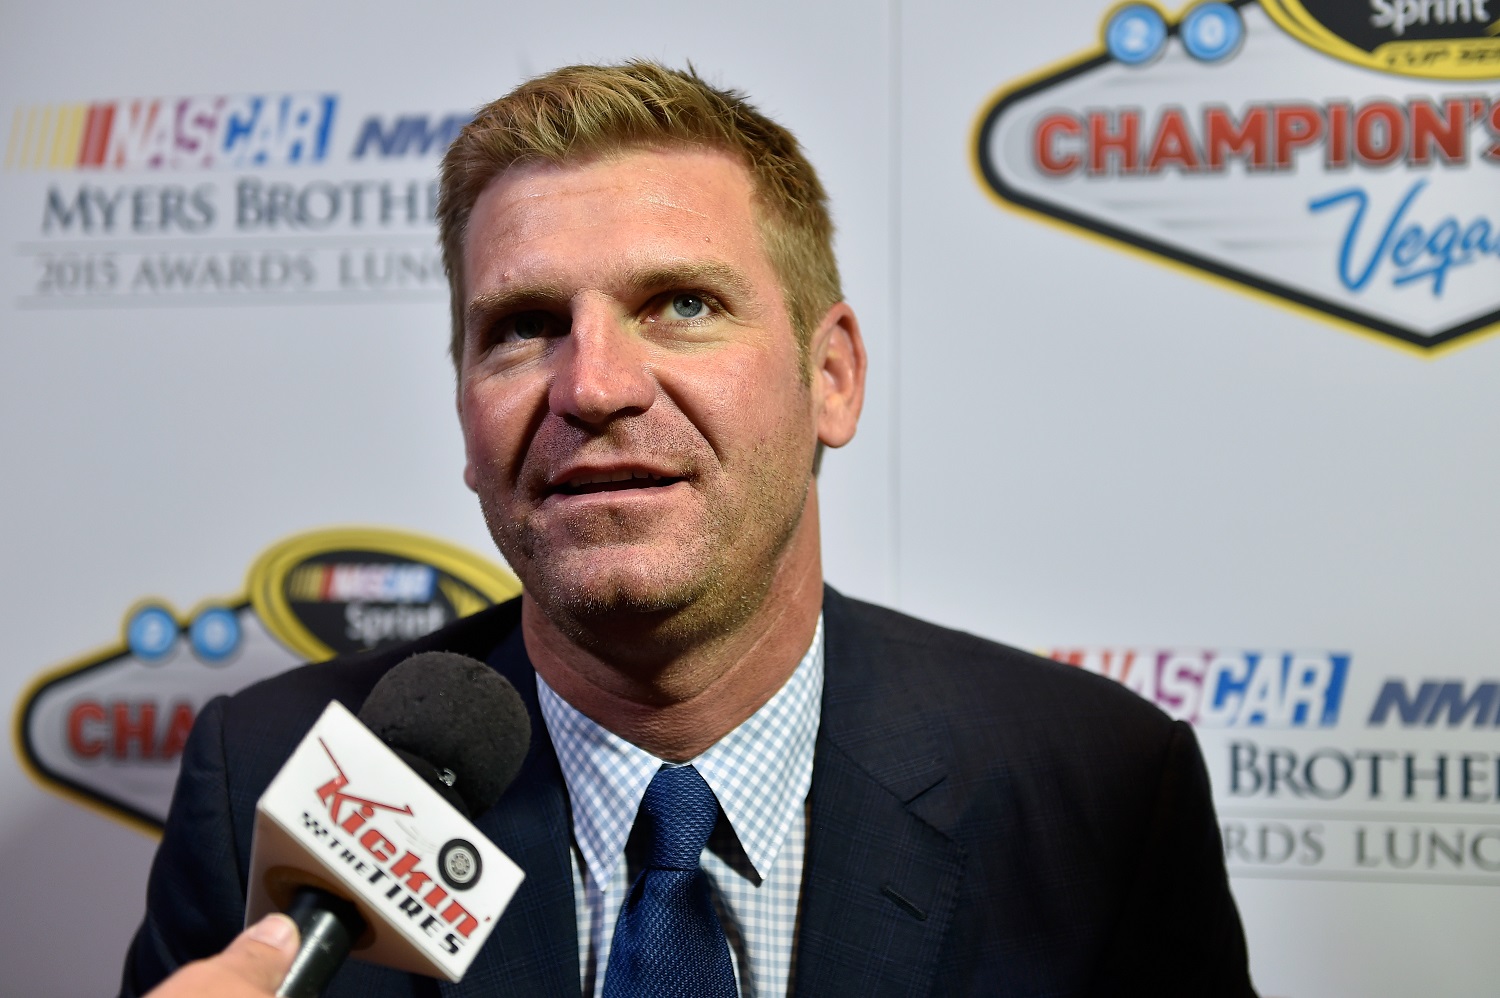 Clint Bowyer's first season in the Fox Sports broadcast booth for the NASCAR Cup Series was a success. | David Becker/NASCAR via Getty Images